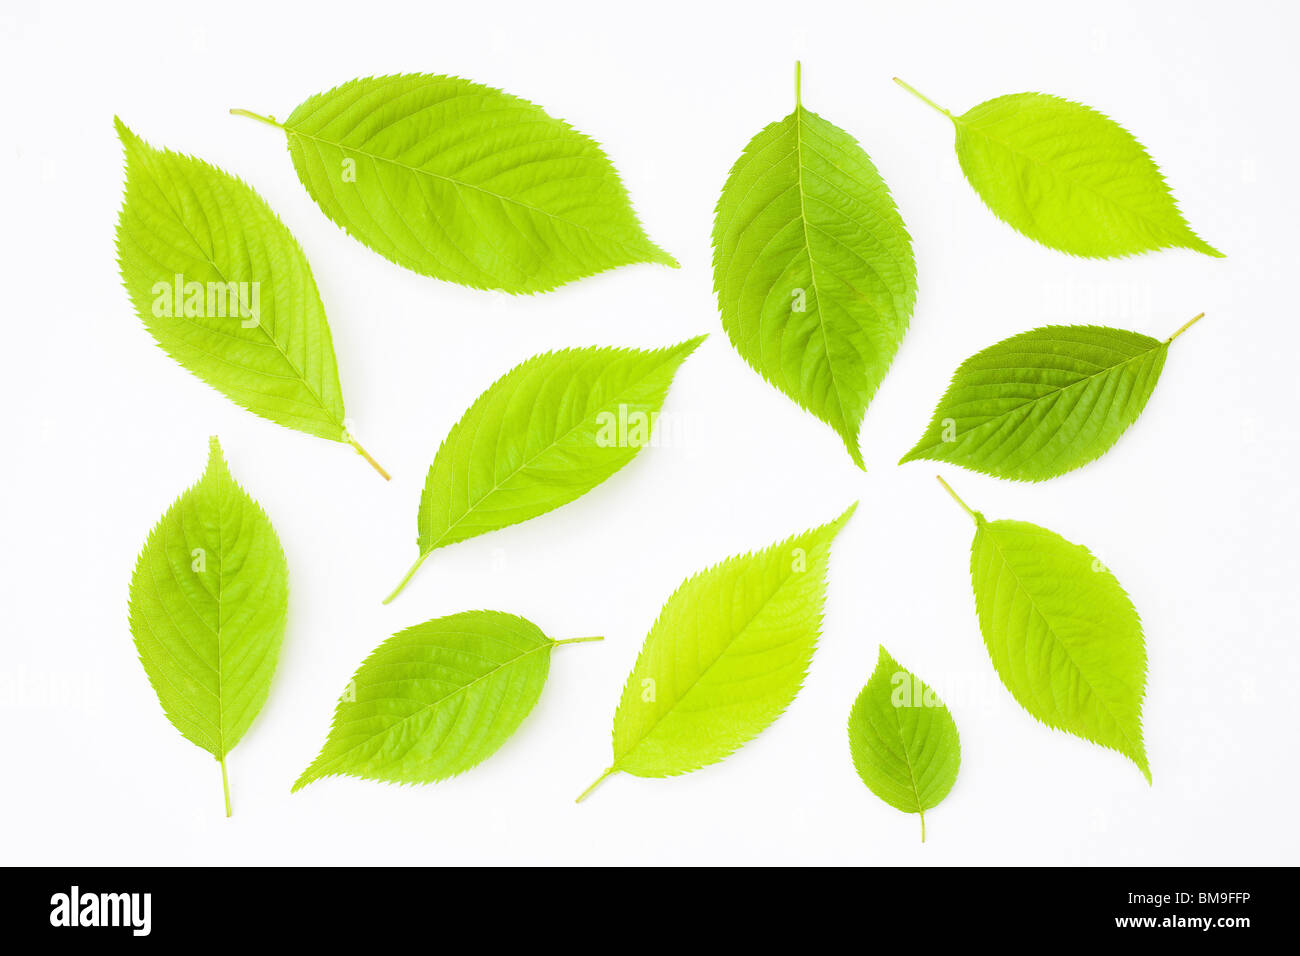 Green leaves on white background Stock Photo